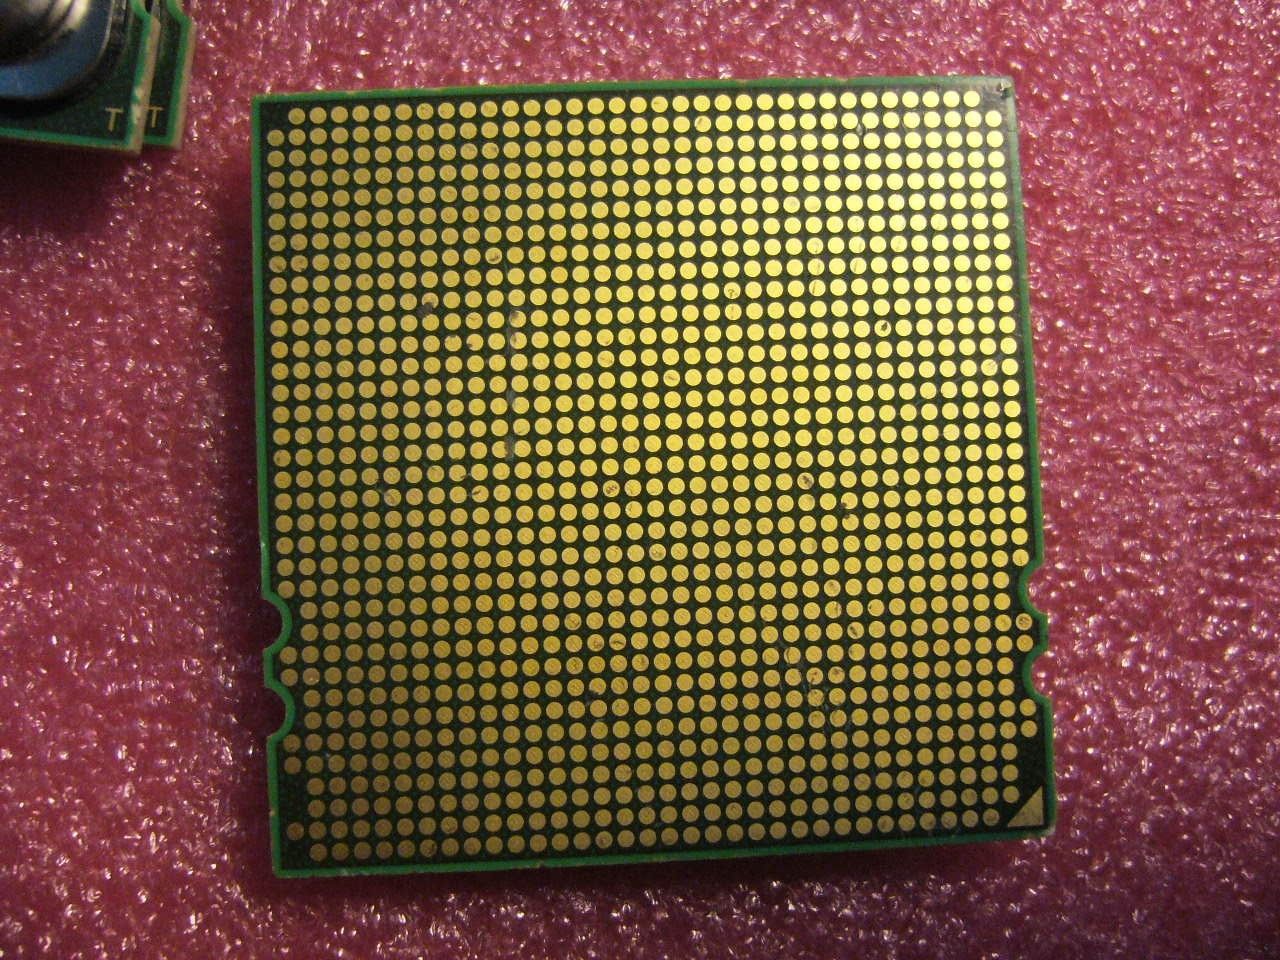 QTY 1x AMD Opteron 2354 2.2 GHz Quad-Core (OS2354WAL4BGH) CPU Socket F 1207 - Click Image to Close